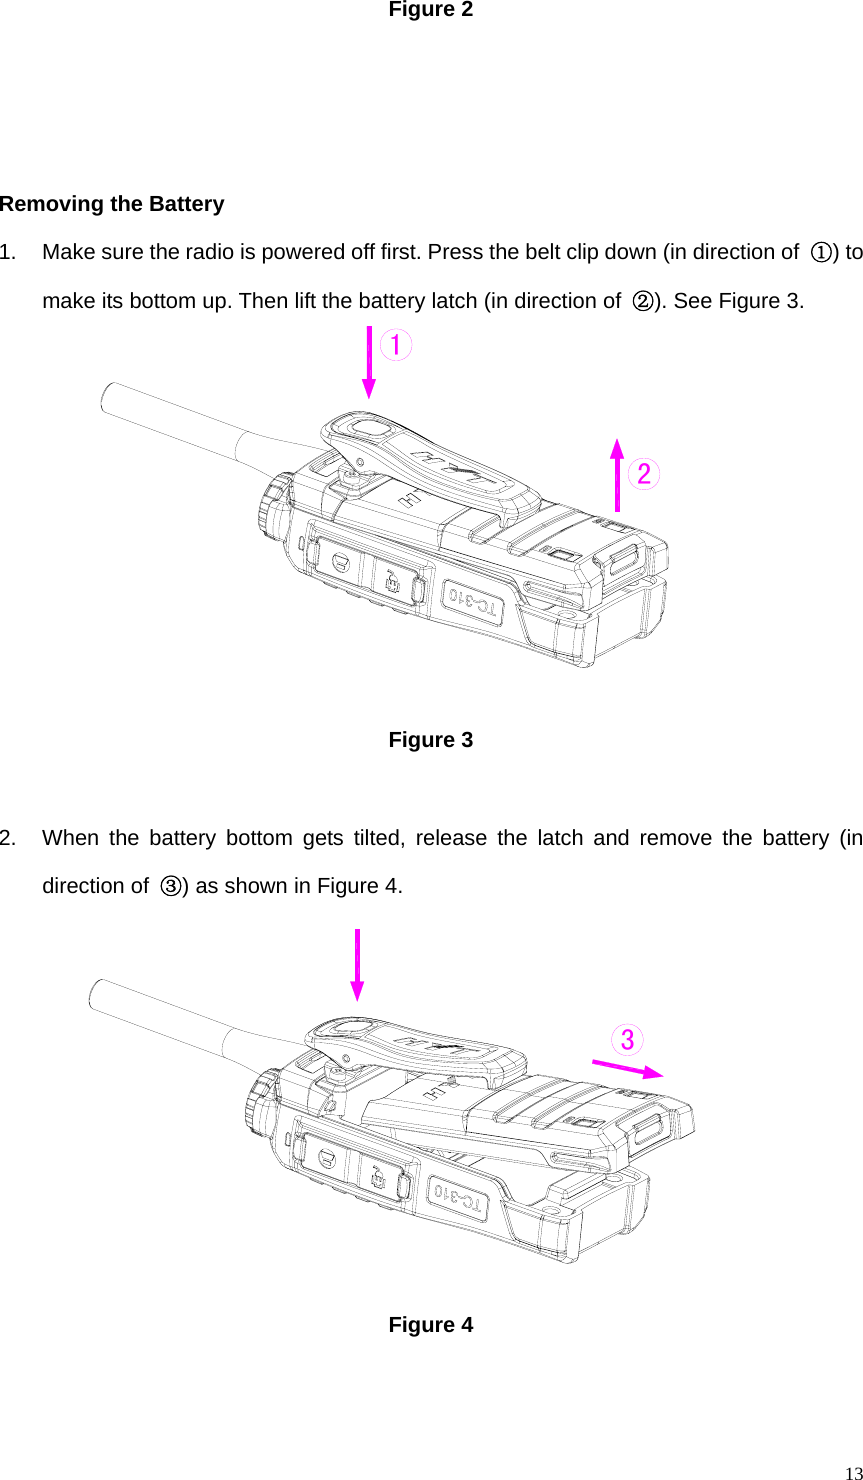   13Figure 2      Removing the Battery   1.  Make sure the radio is powered off first. Press the belt clip down (in direction of  ①) to make its bottom up. Then lift the battery latch (in direction of  ②). See Figure 3.           Figure 3    2.  When the battery bottom gets tilted, release the latch and remove the battery (in direction of  ③) as shown in Figure 4.           Figure 4    321